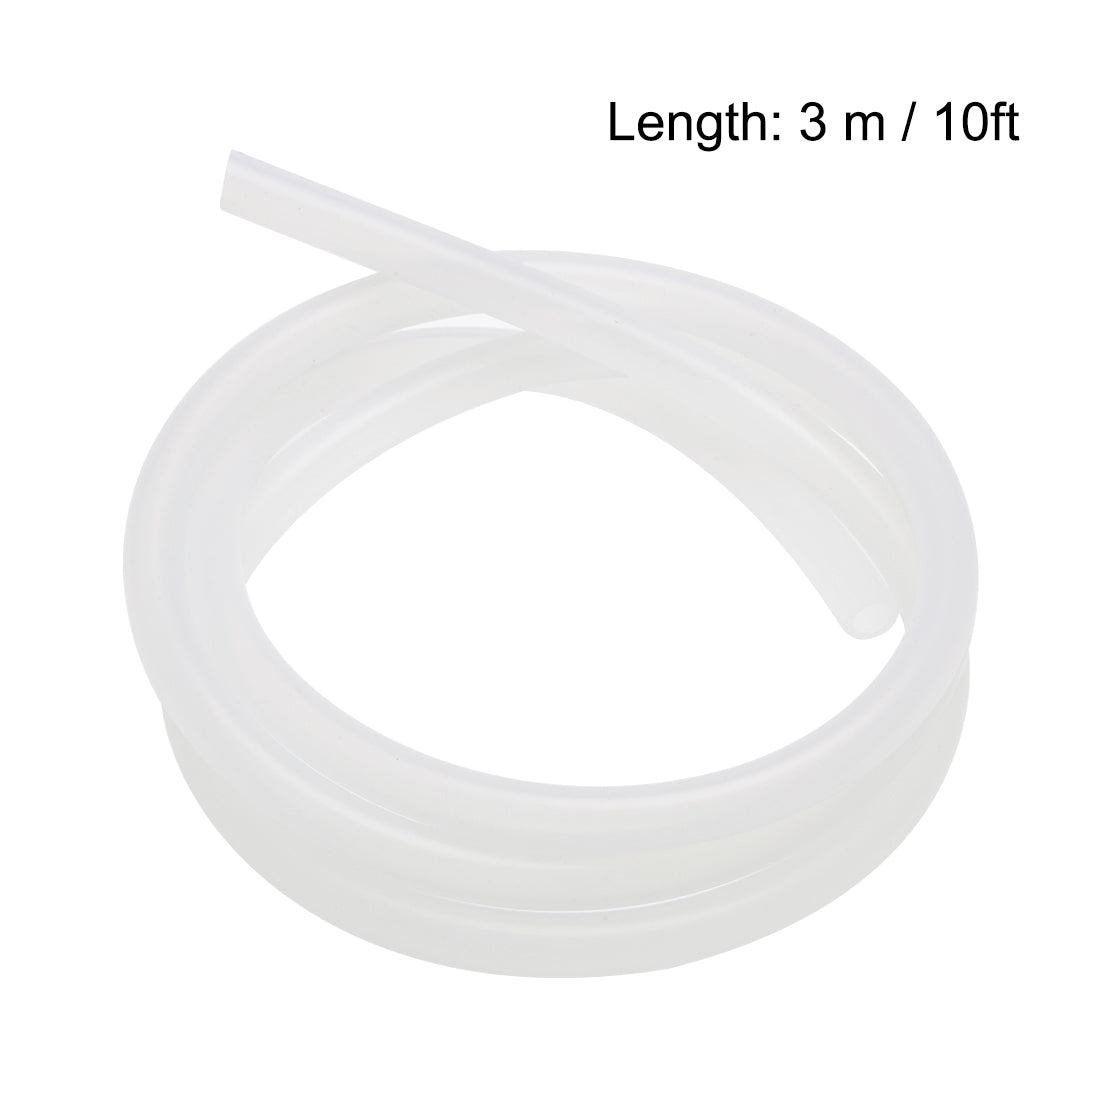 Uxcell Uxcell Silicone Tubing, 1/4" ID x 5/16" OD 10ft Rubber Tube Translucent